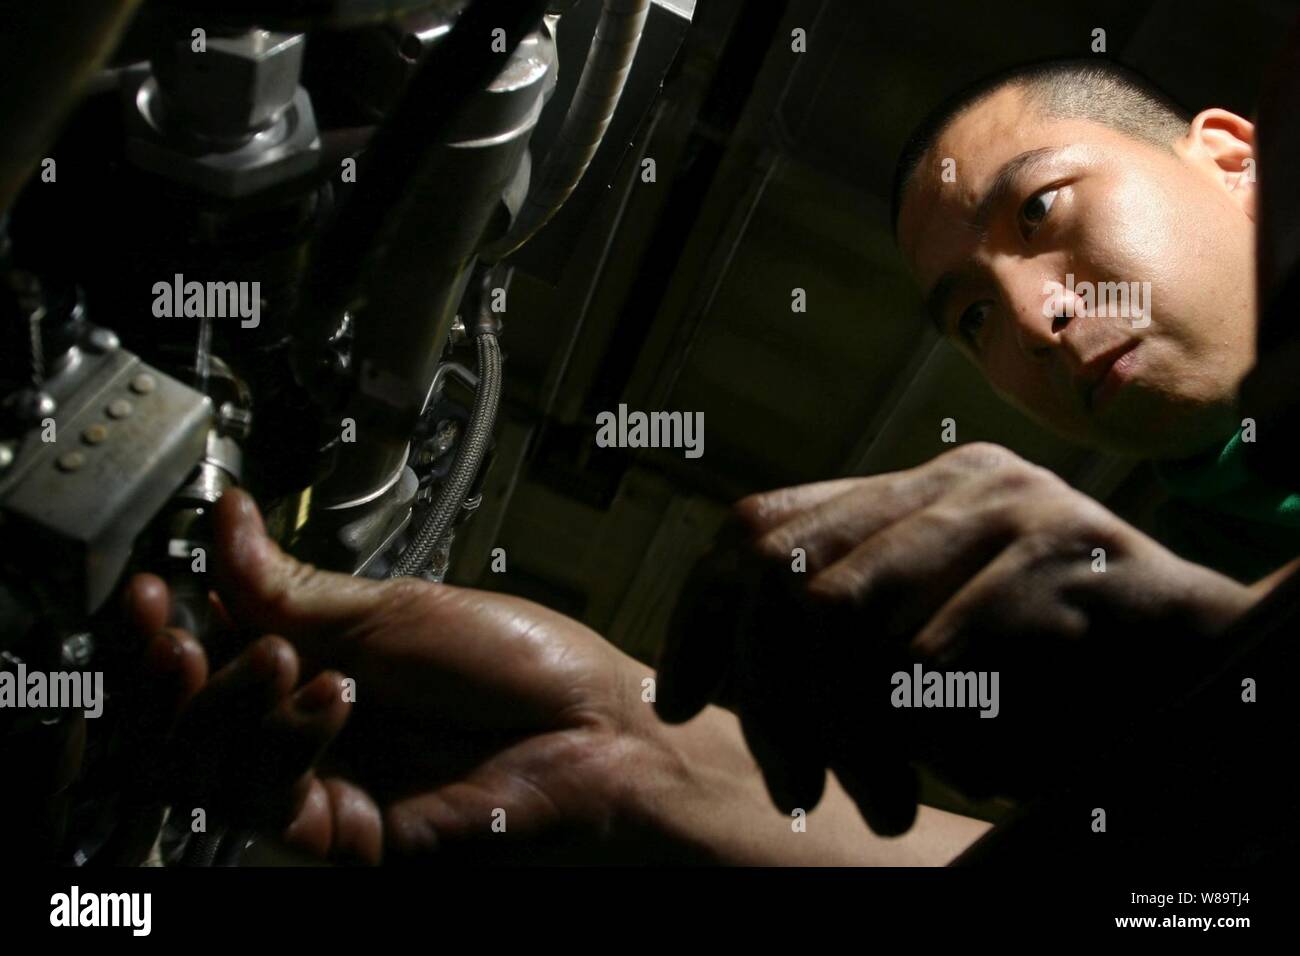 Petty Officer 2nd Class Christian Tan prepares a J52 jet engine for installation into an EA-6B Prowler aircraft in the hangar deck of the aircraft carrier USS Kitty Hawk (CV 63) as the ship operates in the waters off southern Japan on Nov. 3, 2006.  Tan is a U.S. Navy aviation machinist's mate onboard the carrier. Stock Photo